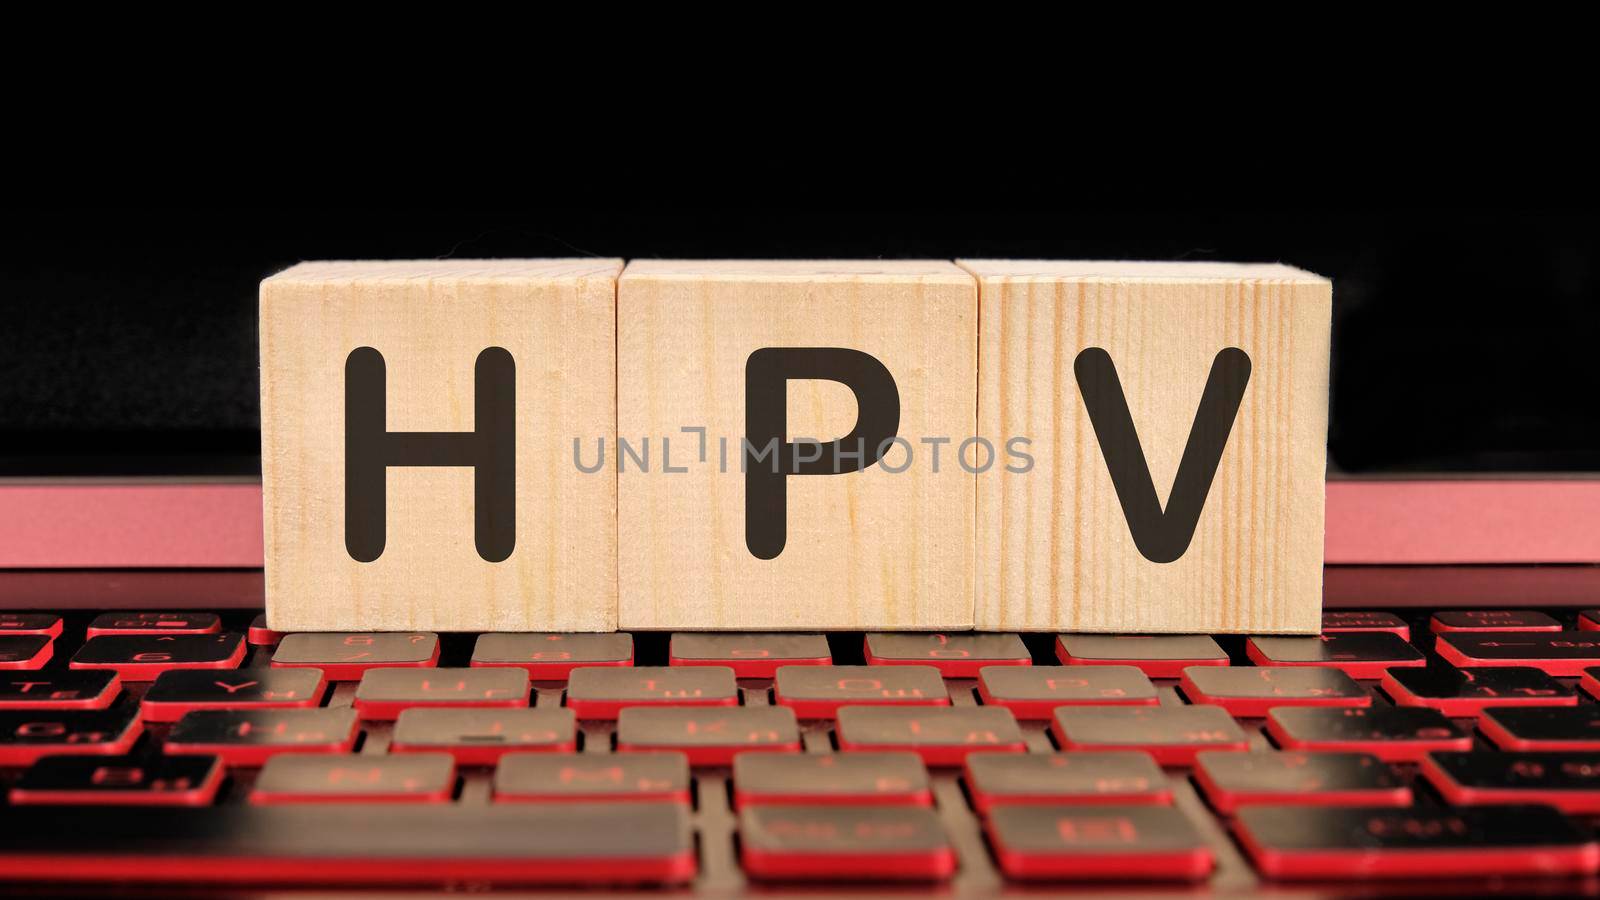 HPV the inscription on wooden cubes on the illuminated laptop keyboard.